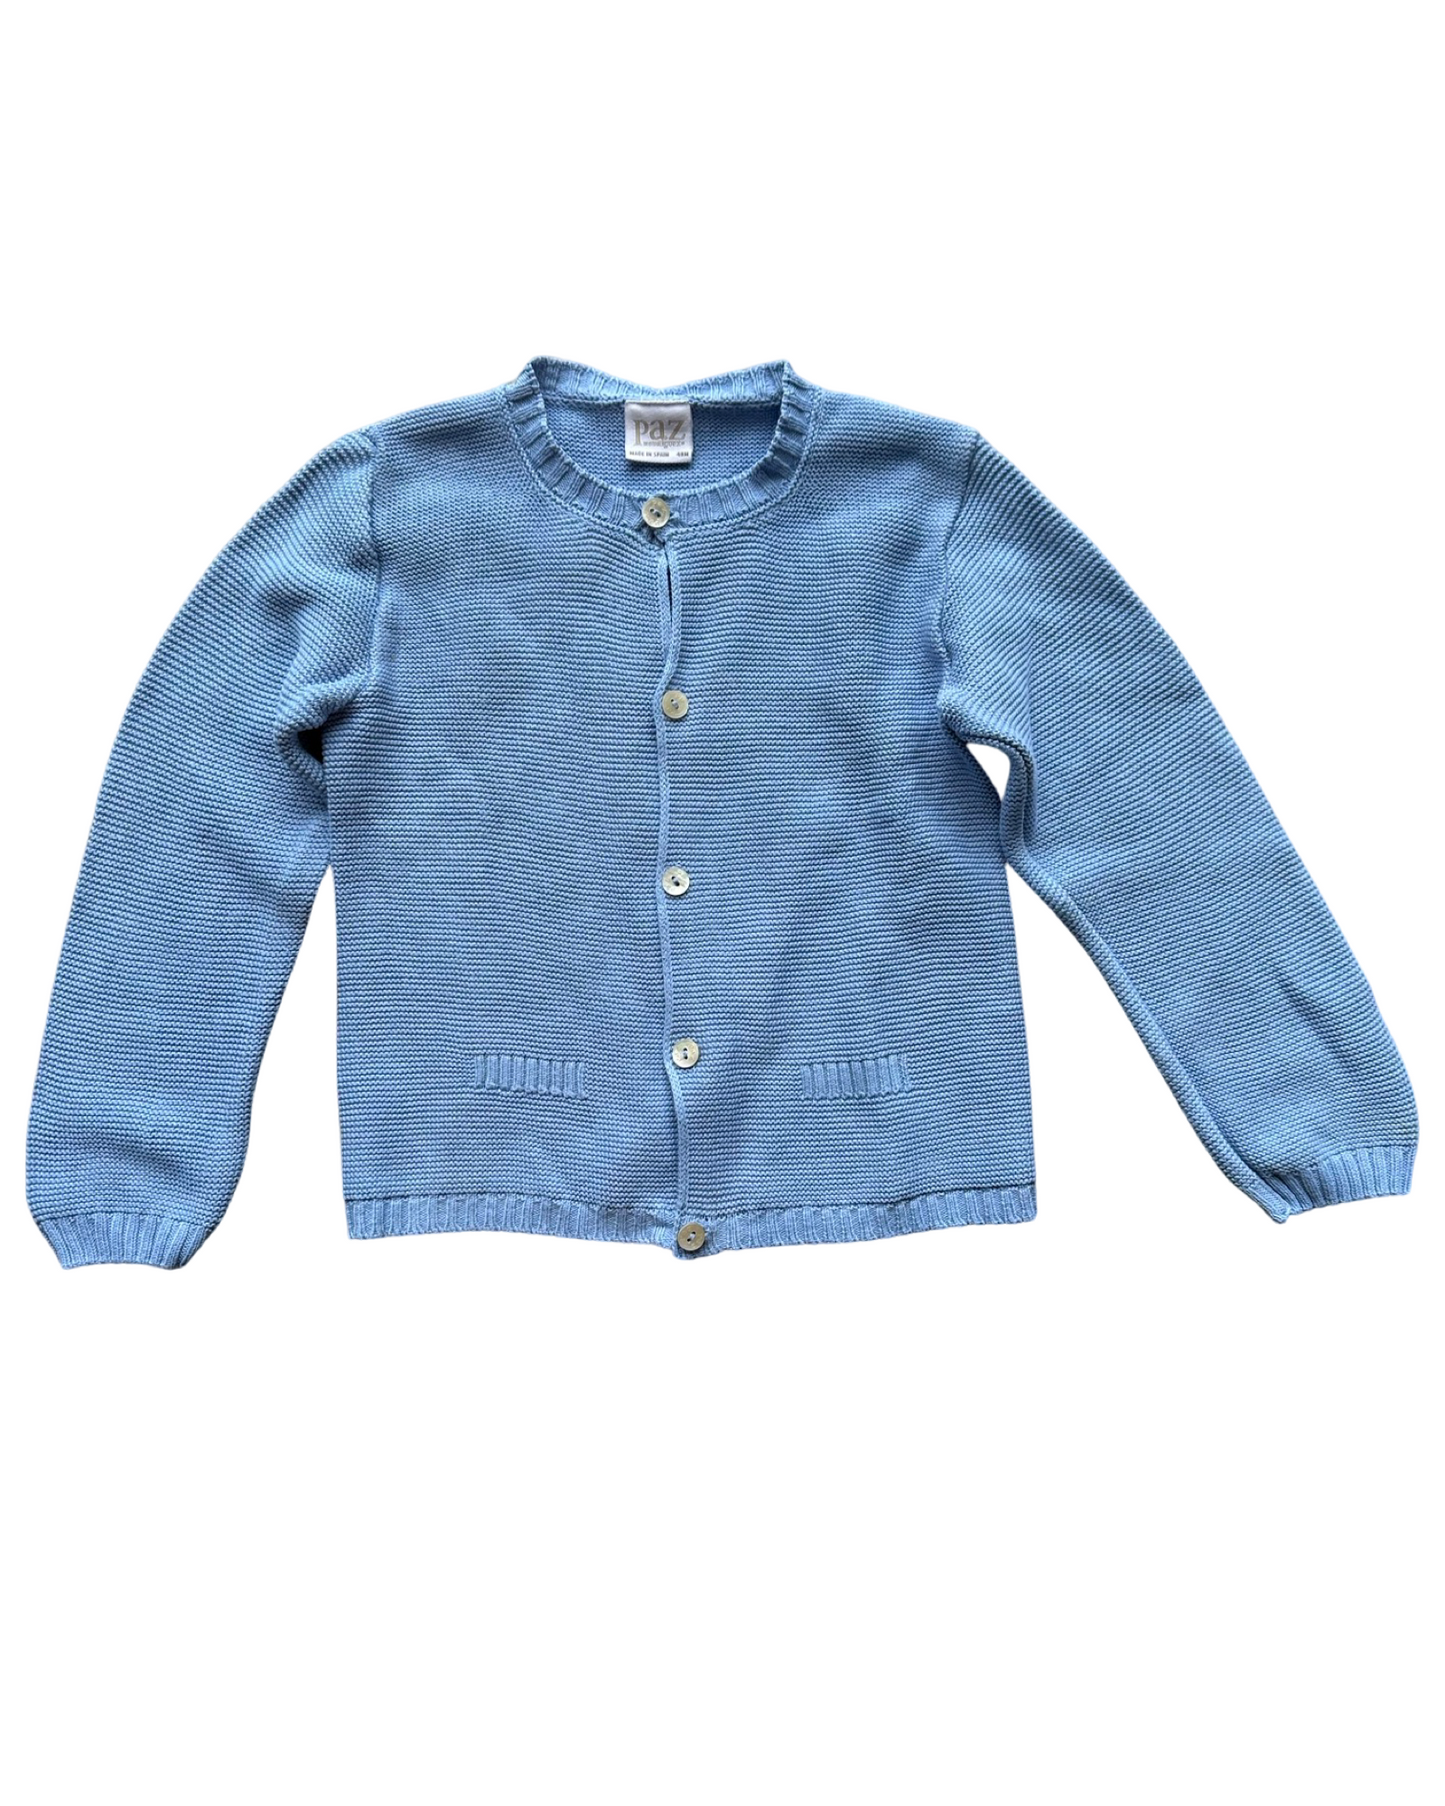 Paz Rodriguez knitted blue cardigan (size 3-4yrs)